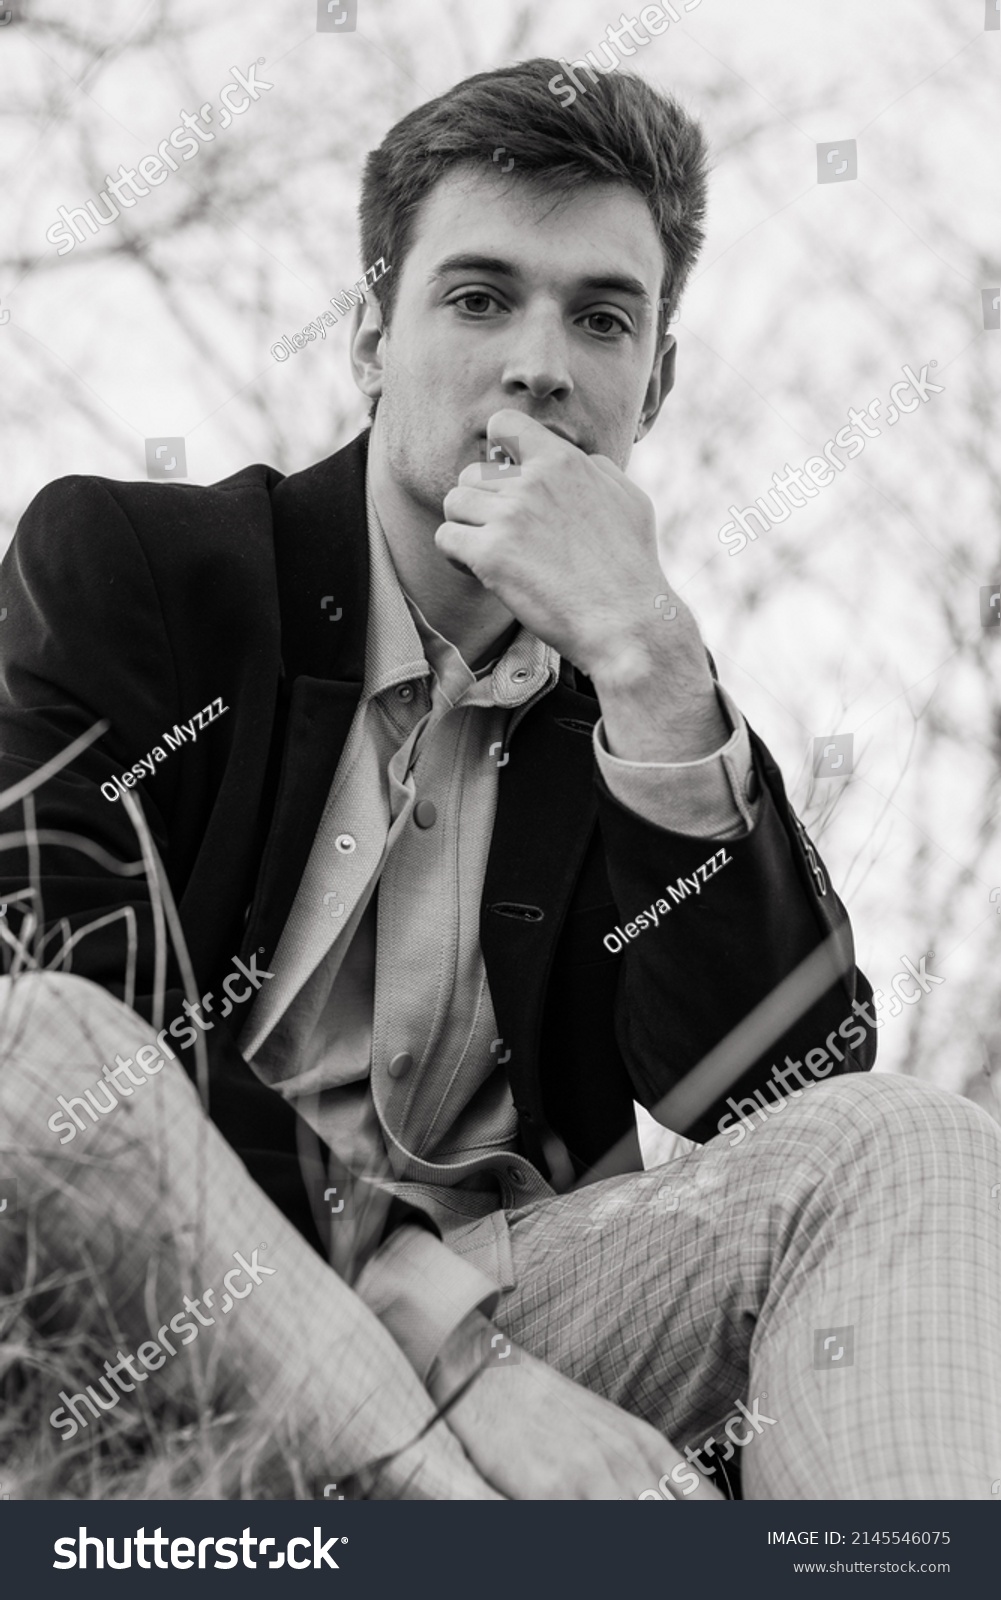 portrait-handsome-young-man-nature-black-stock-photo-2145546075-shutterstock